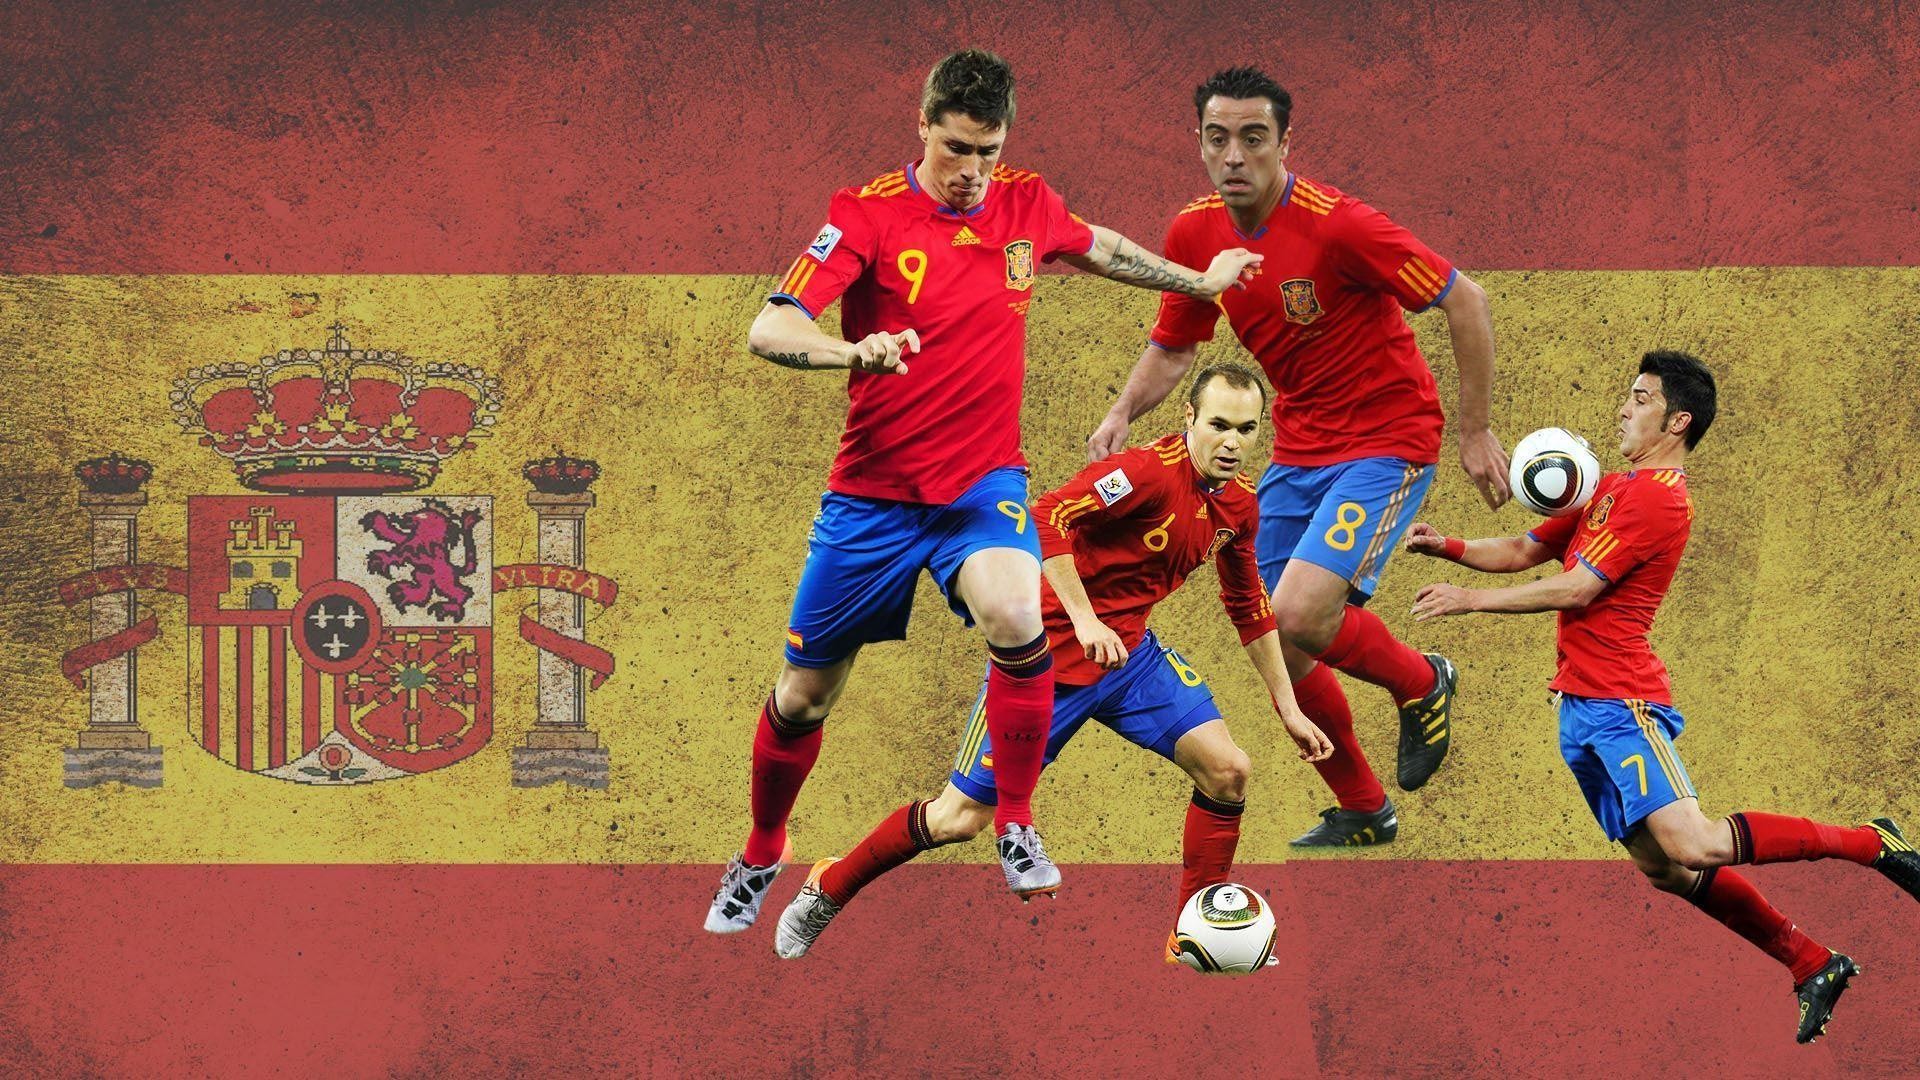 1920x1080 Spain national football team wallpaper and Theme | All for Windows .